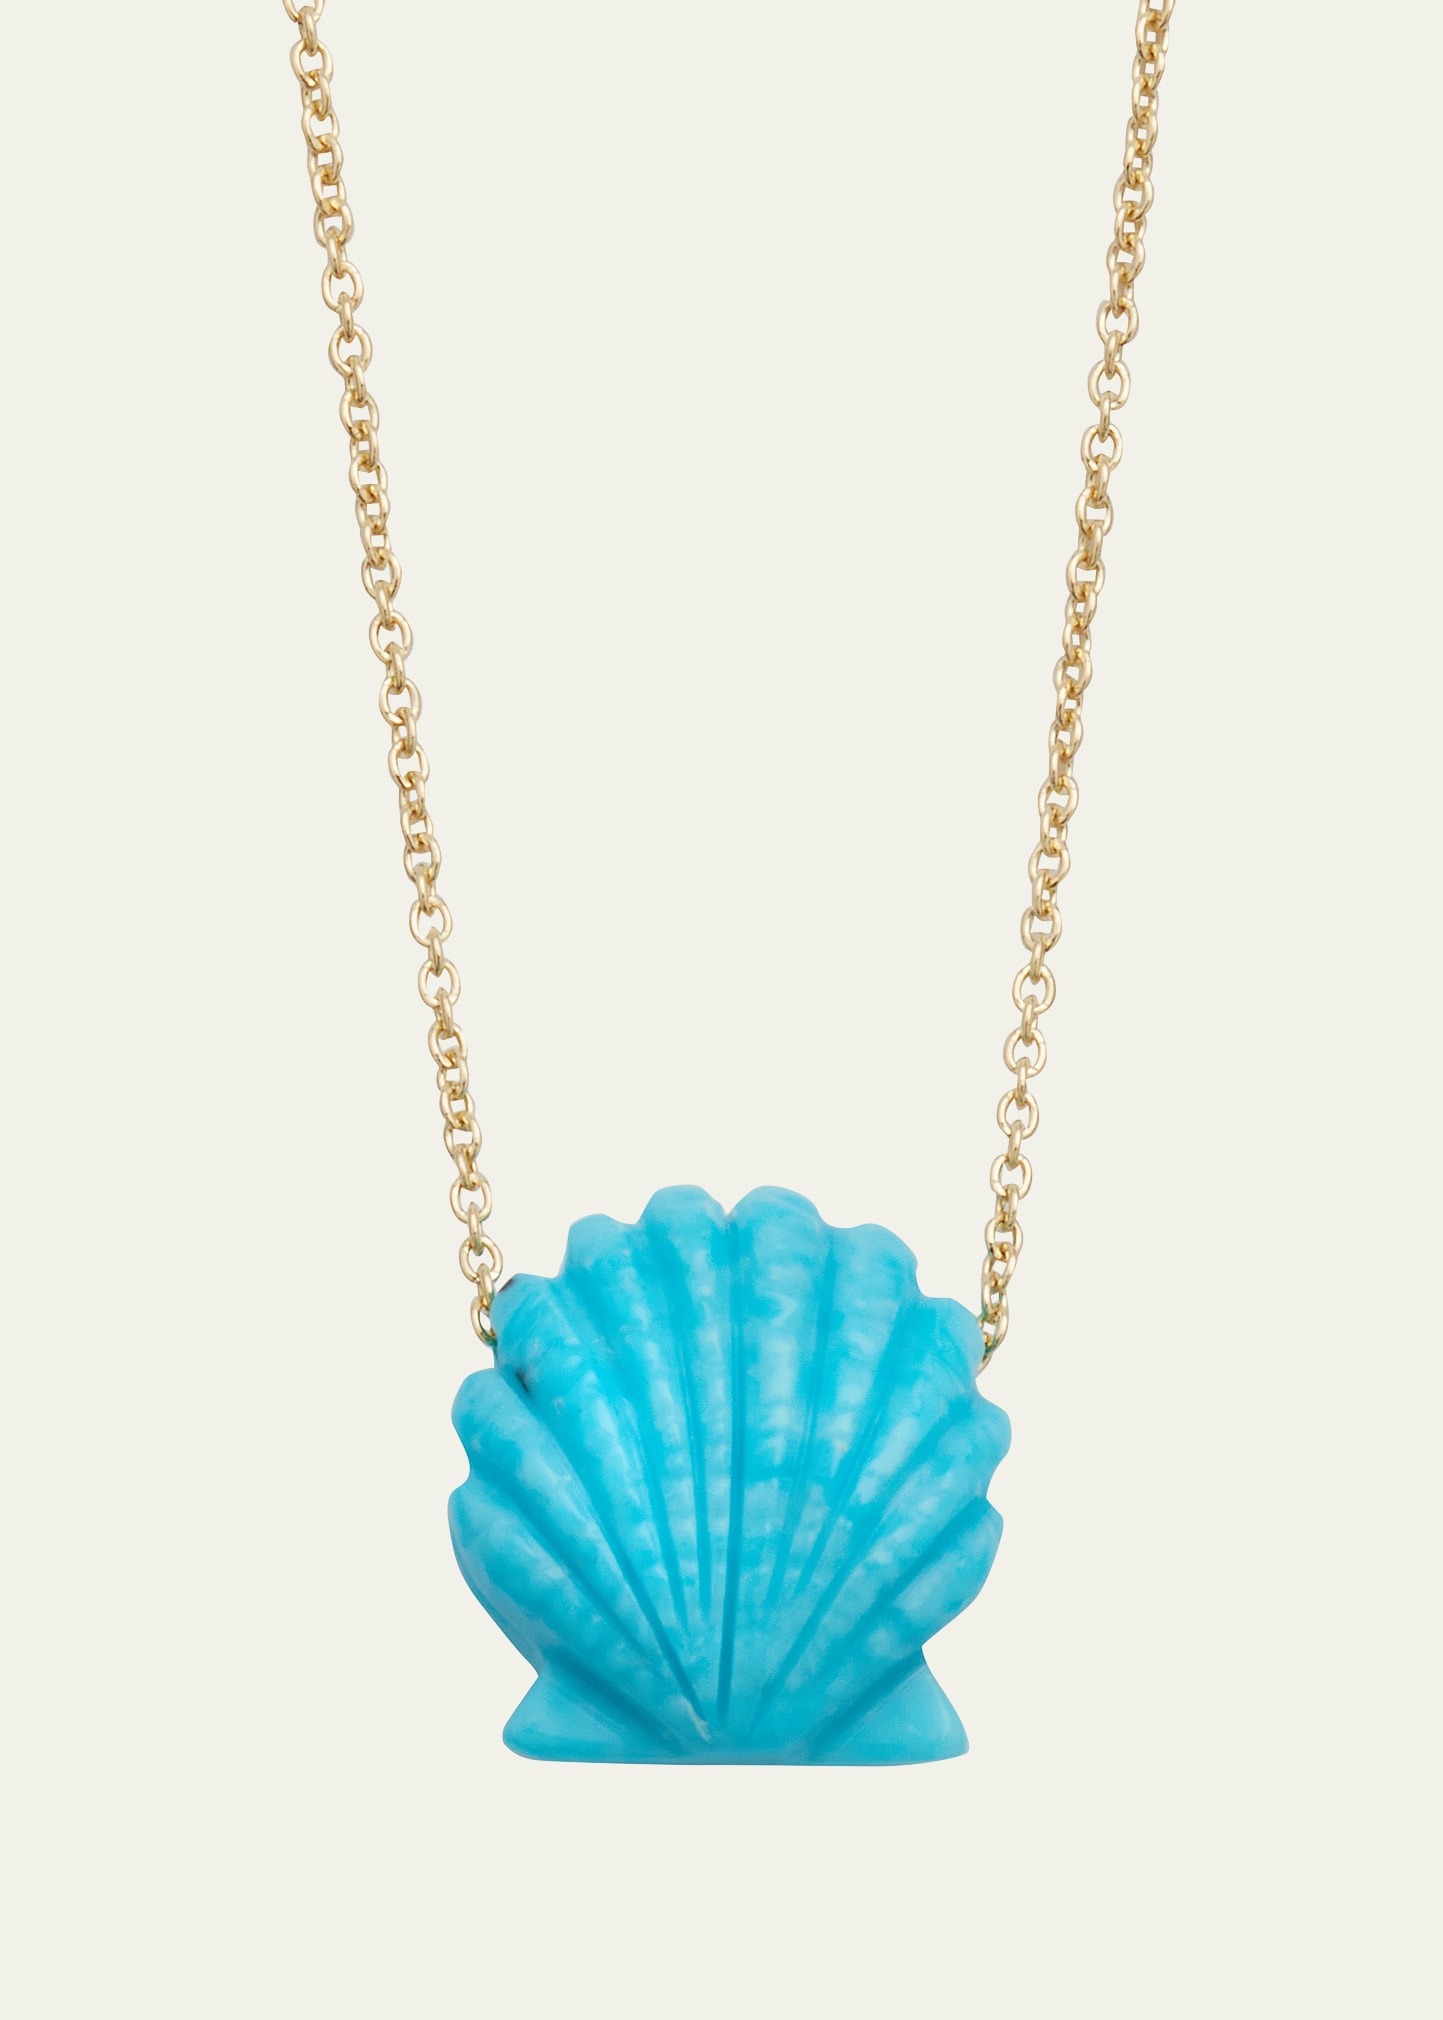 Turquoise Concha Shell Necklace